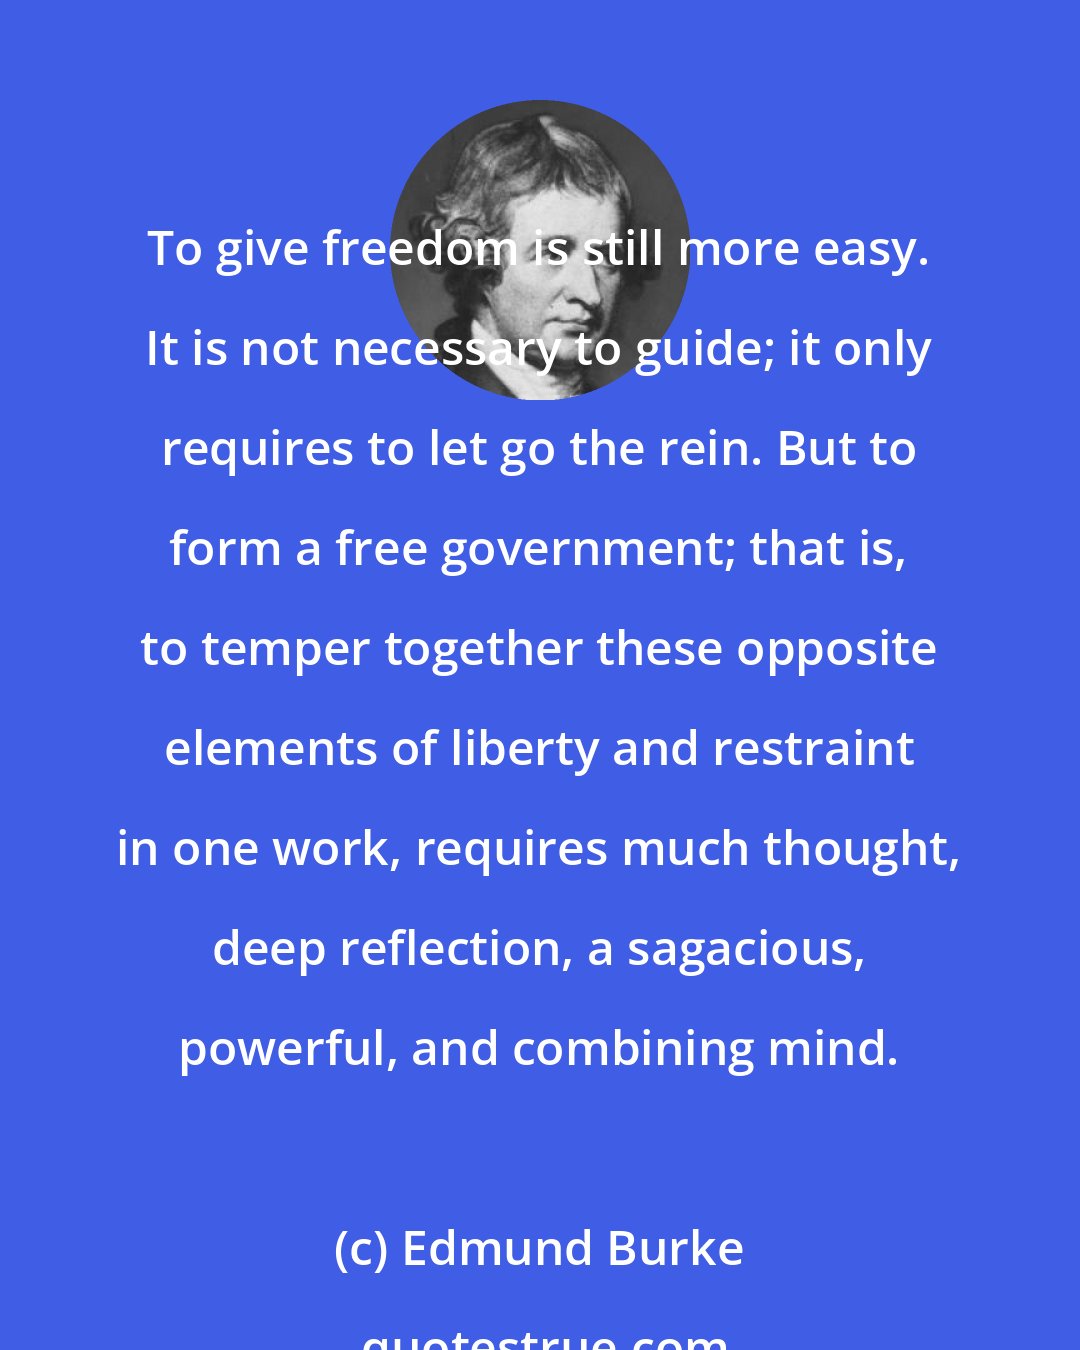 Edmund Burke: To give freedom is still more easy. It is not necessary to guide; it only requires to let go the rein. But to form a free government; that is, to temper together these opposite elements of liberty and restraint in one work, requires much thought, deep reflection, a sagacious, powerful, and combining mind.